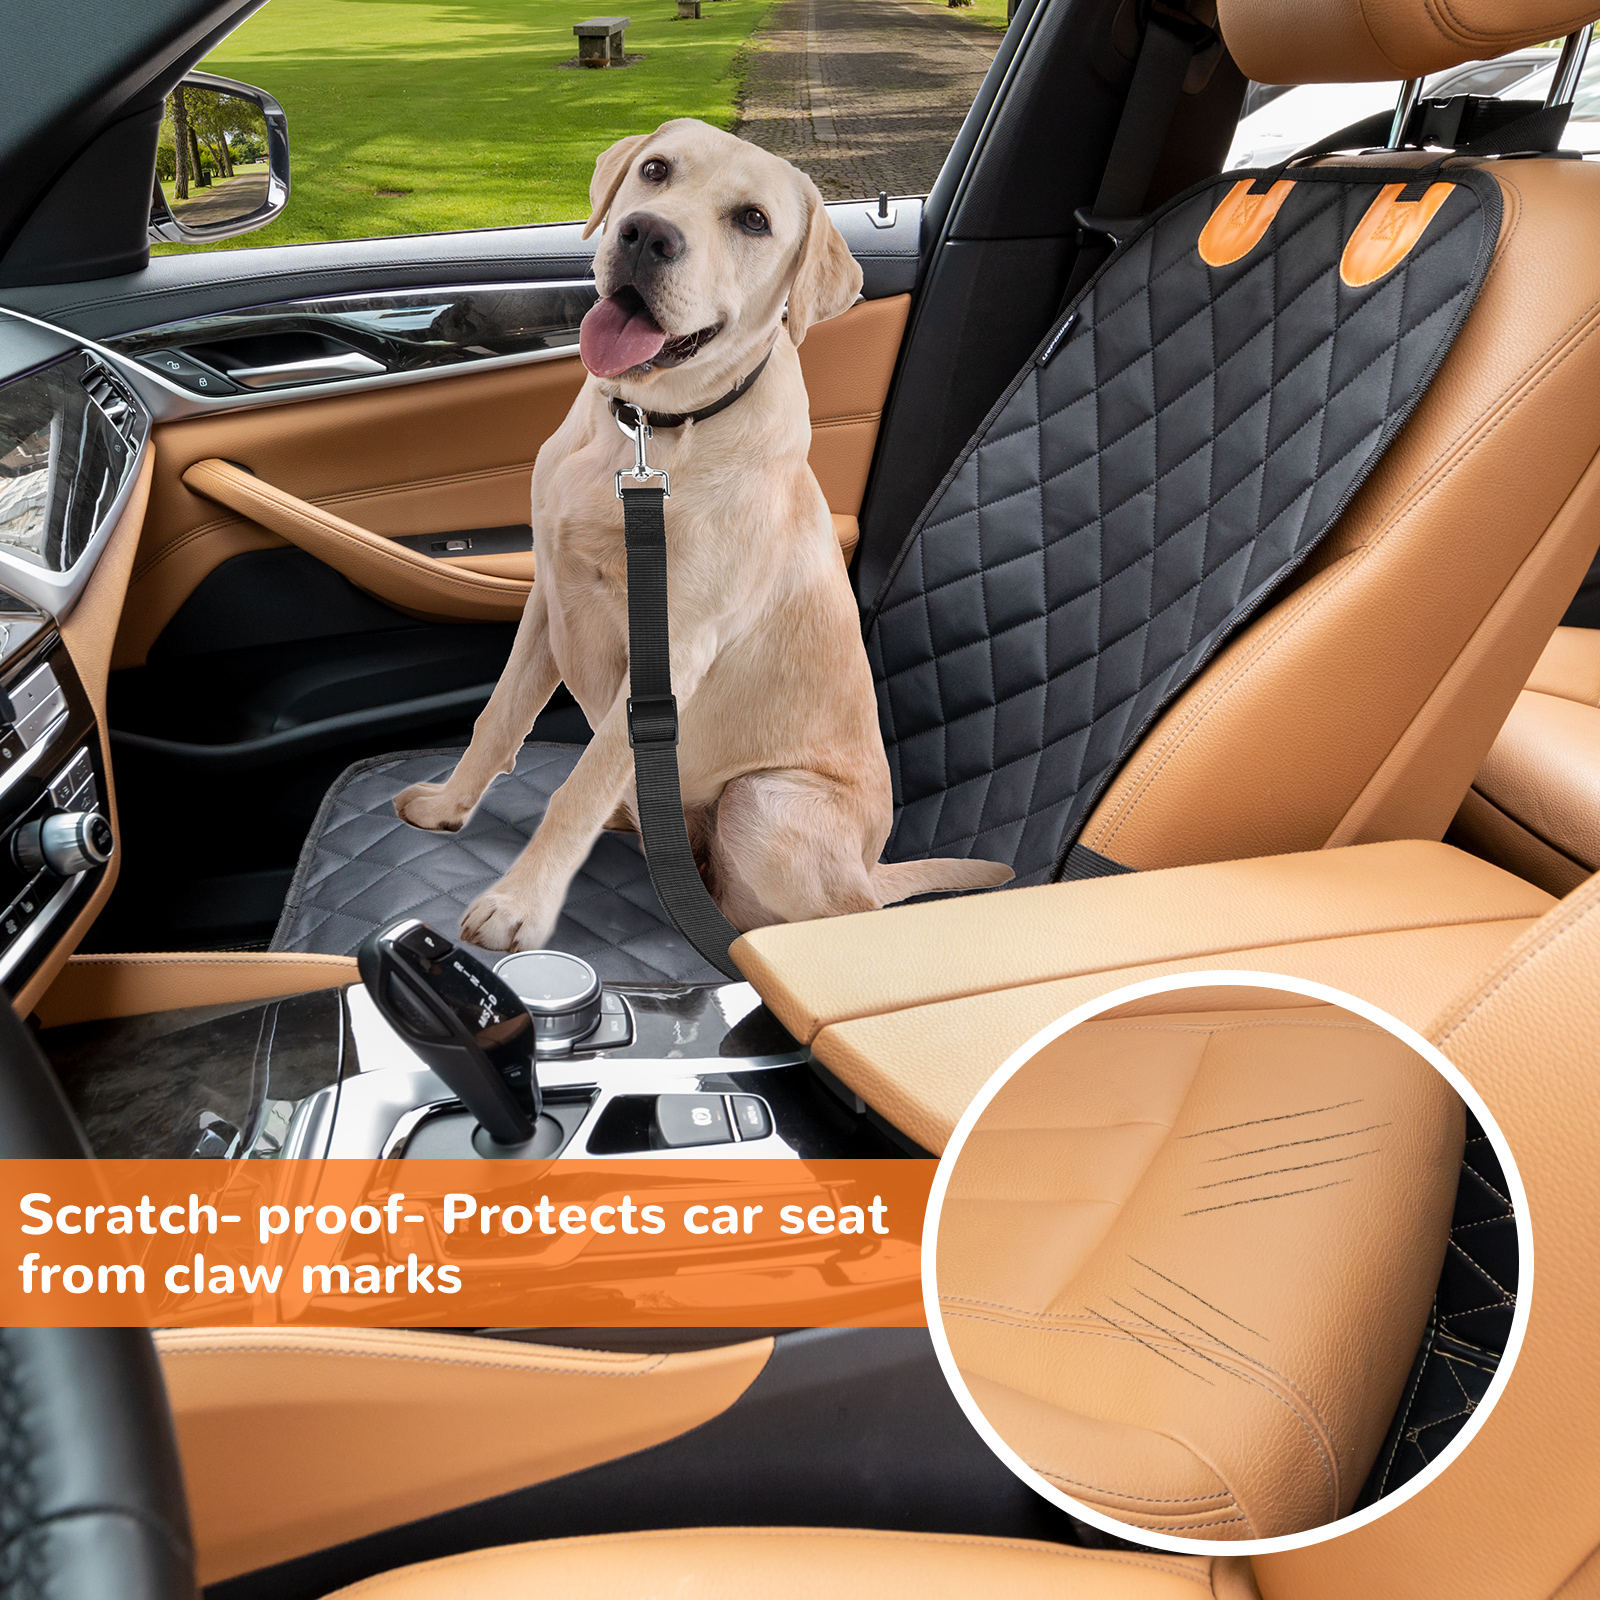 URPOWER Pet Front Seat Cover for Cars 100%waterproof Nonslip Rubber Backing with Anchors, Quilted, Padded, Durable Pet Seat Covers for Cars, Trucks & SUVs 